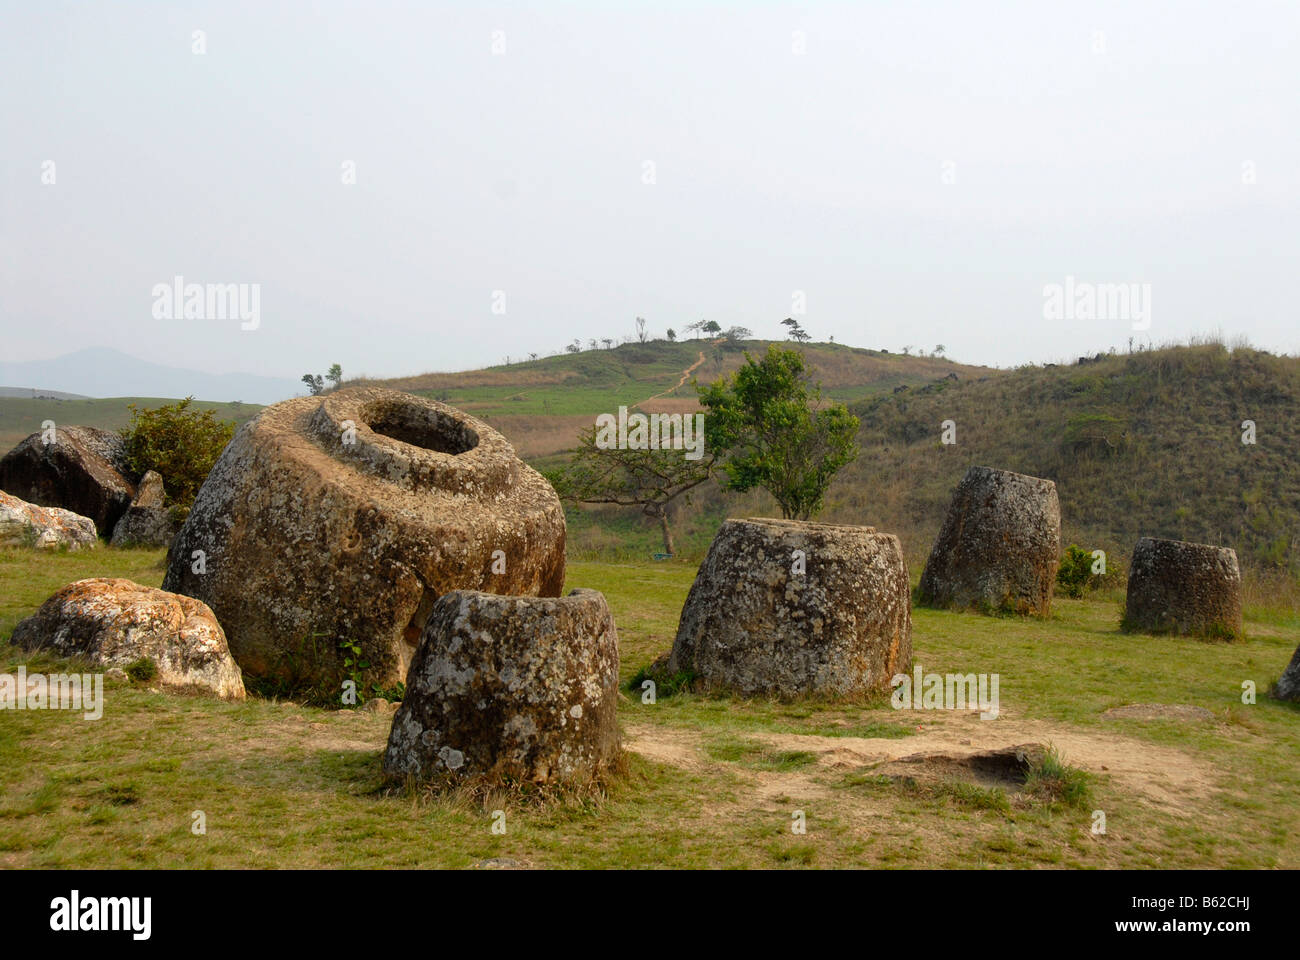 Numerous enormous jars, monoliths made of stone, Plain of Jars, Xieng Khuang Province, Laos, Southeast Asia Stock Photo